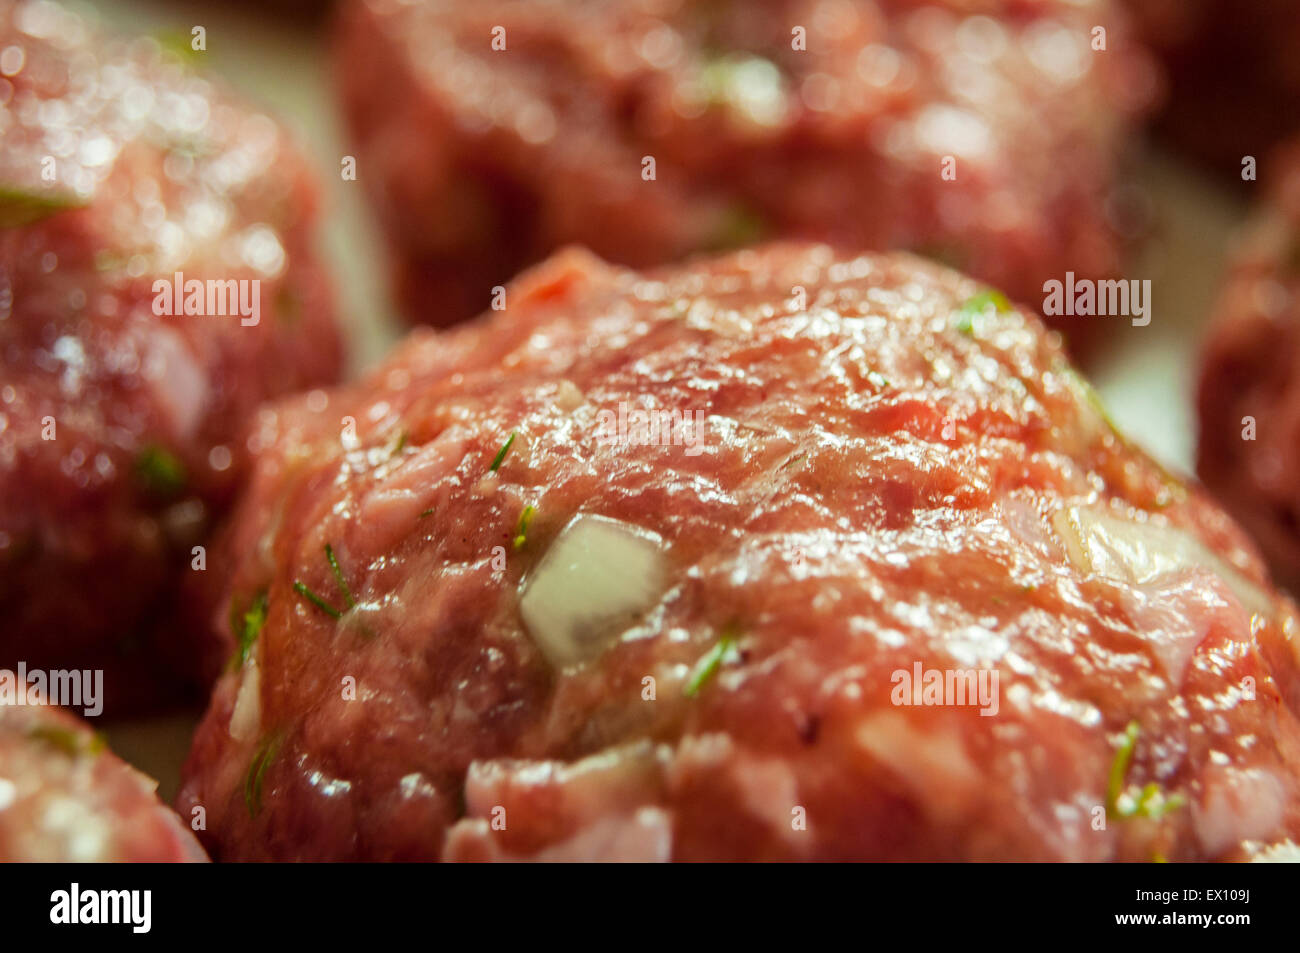 Raw meatballs of beef and pork Stock Photo